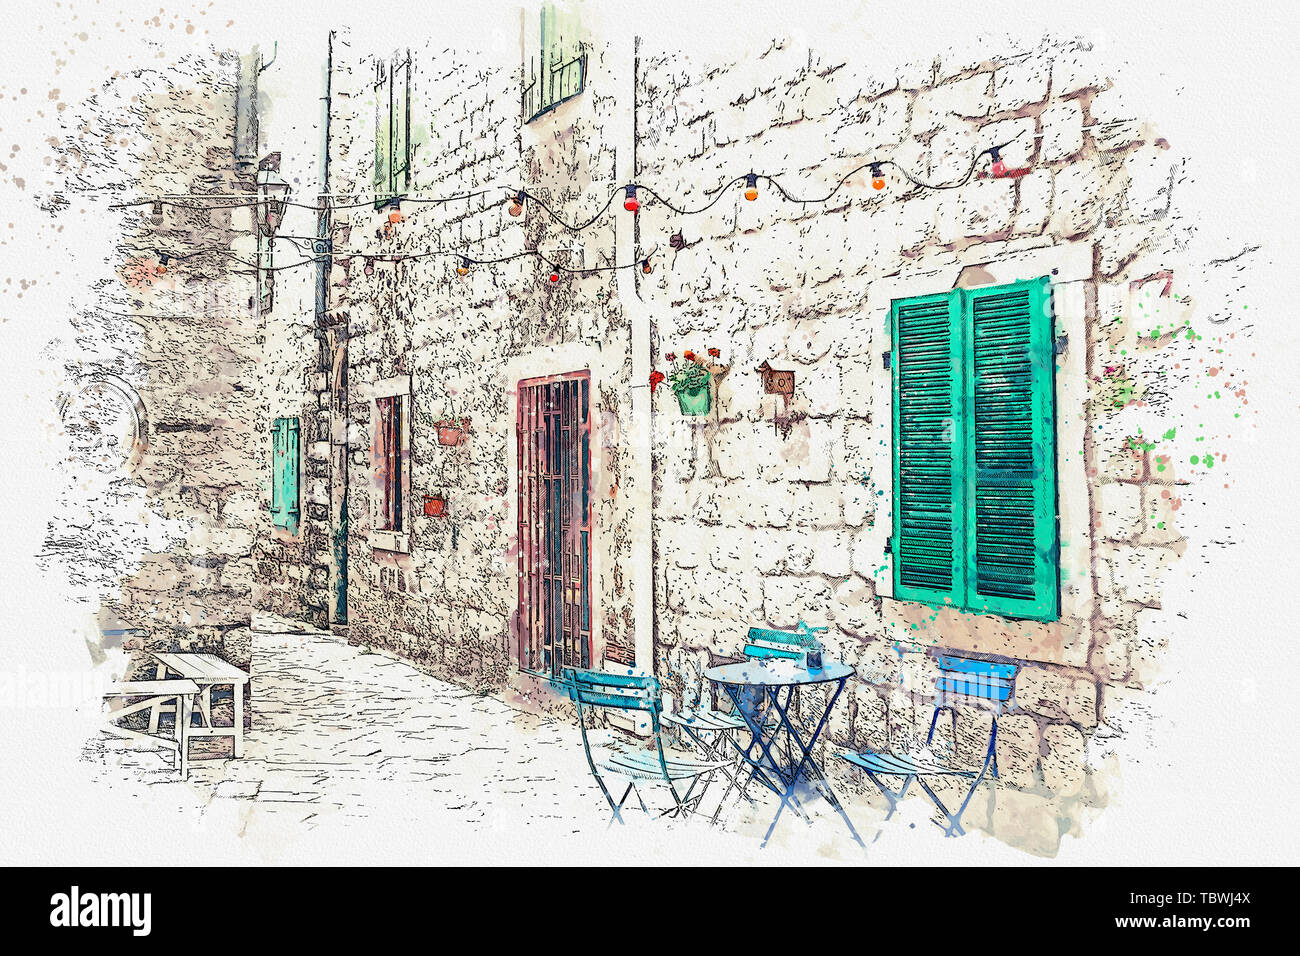 Watercolor sketch visible on an empty street cafe. Tables and chairs near the old building. Stock Photo